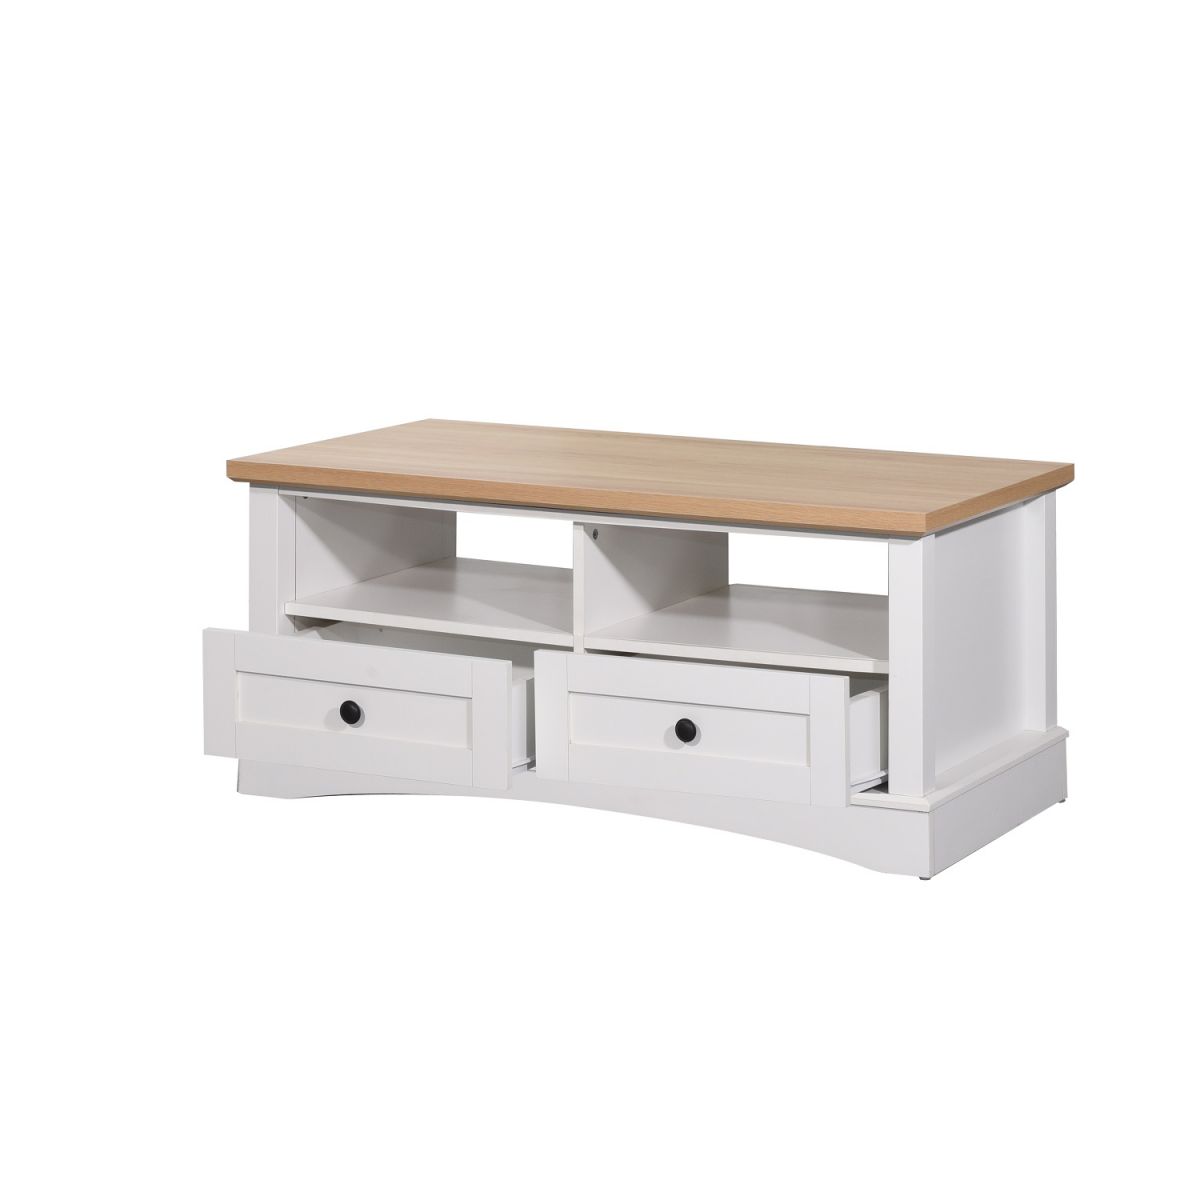 Carden Coffee Table 2 Drawers - White & Oak